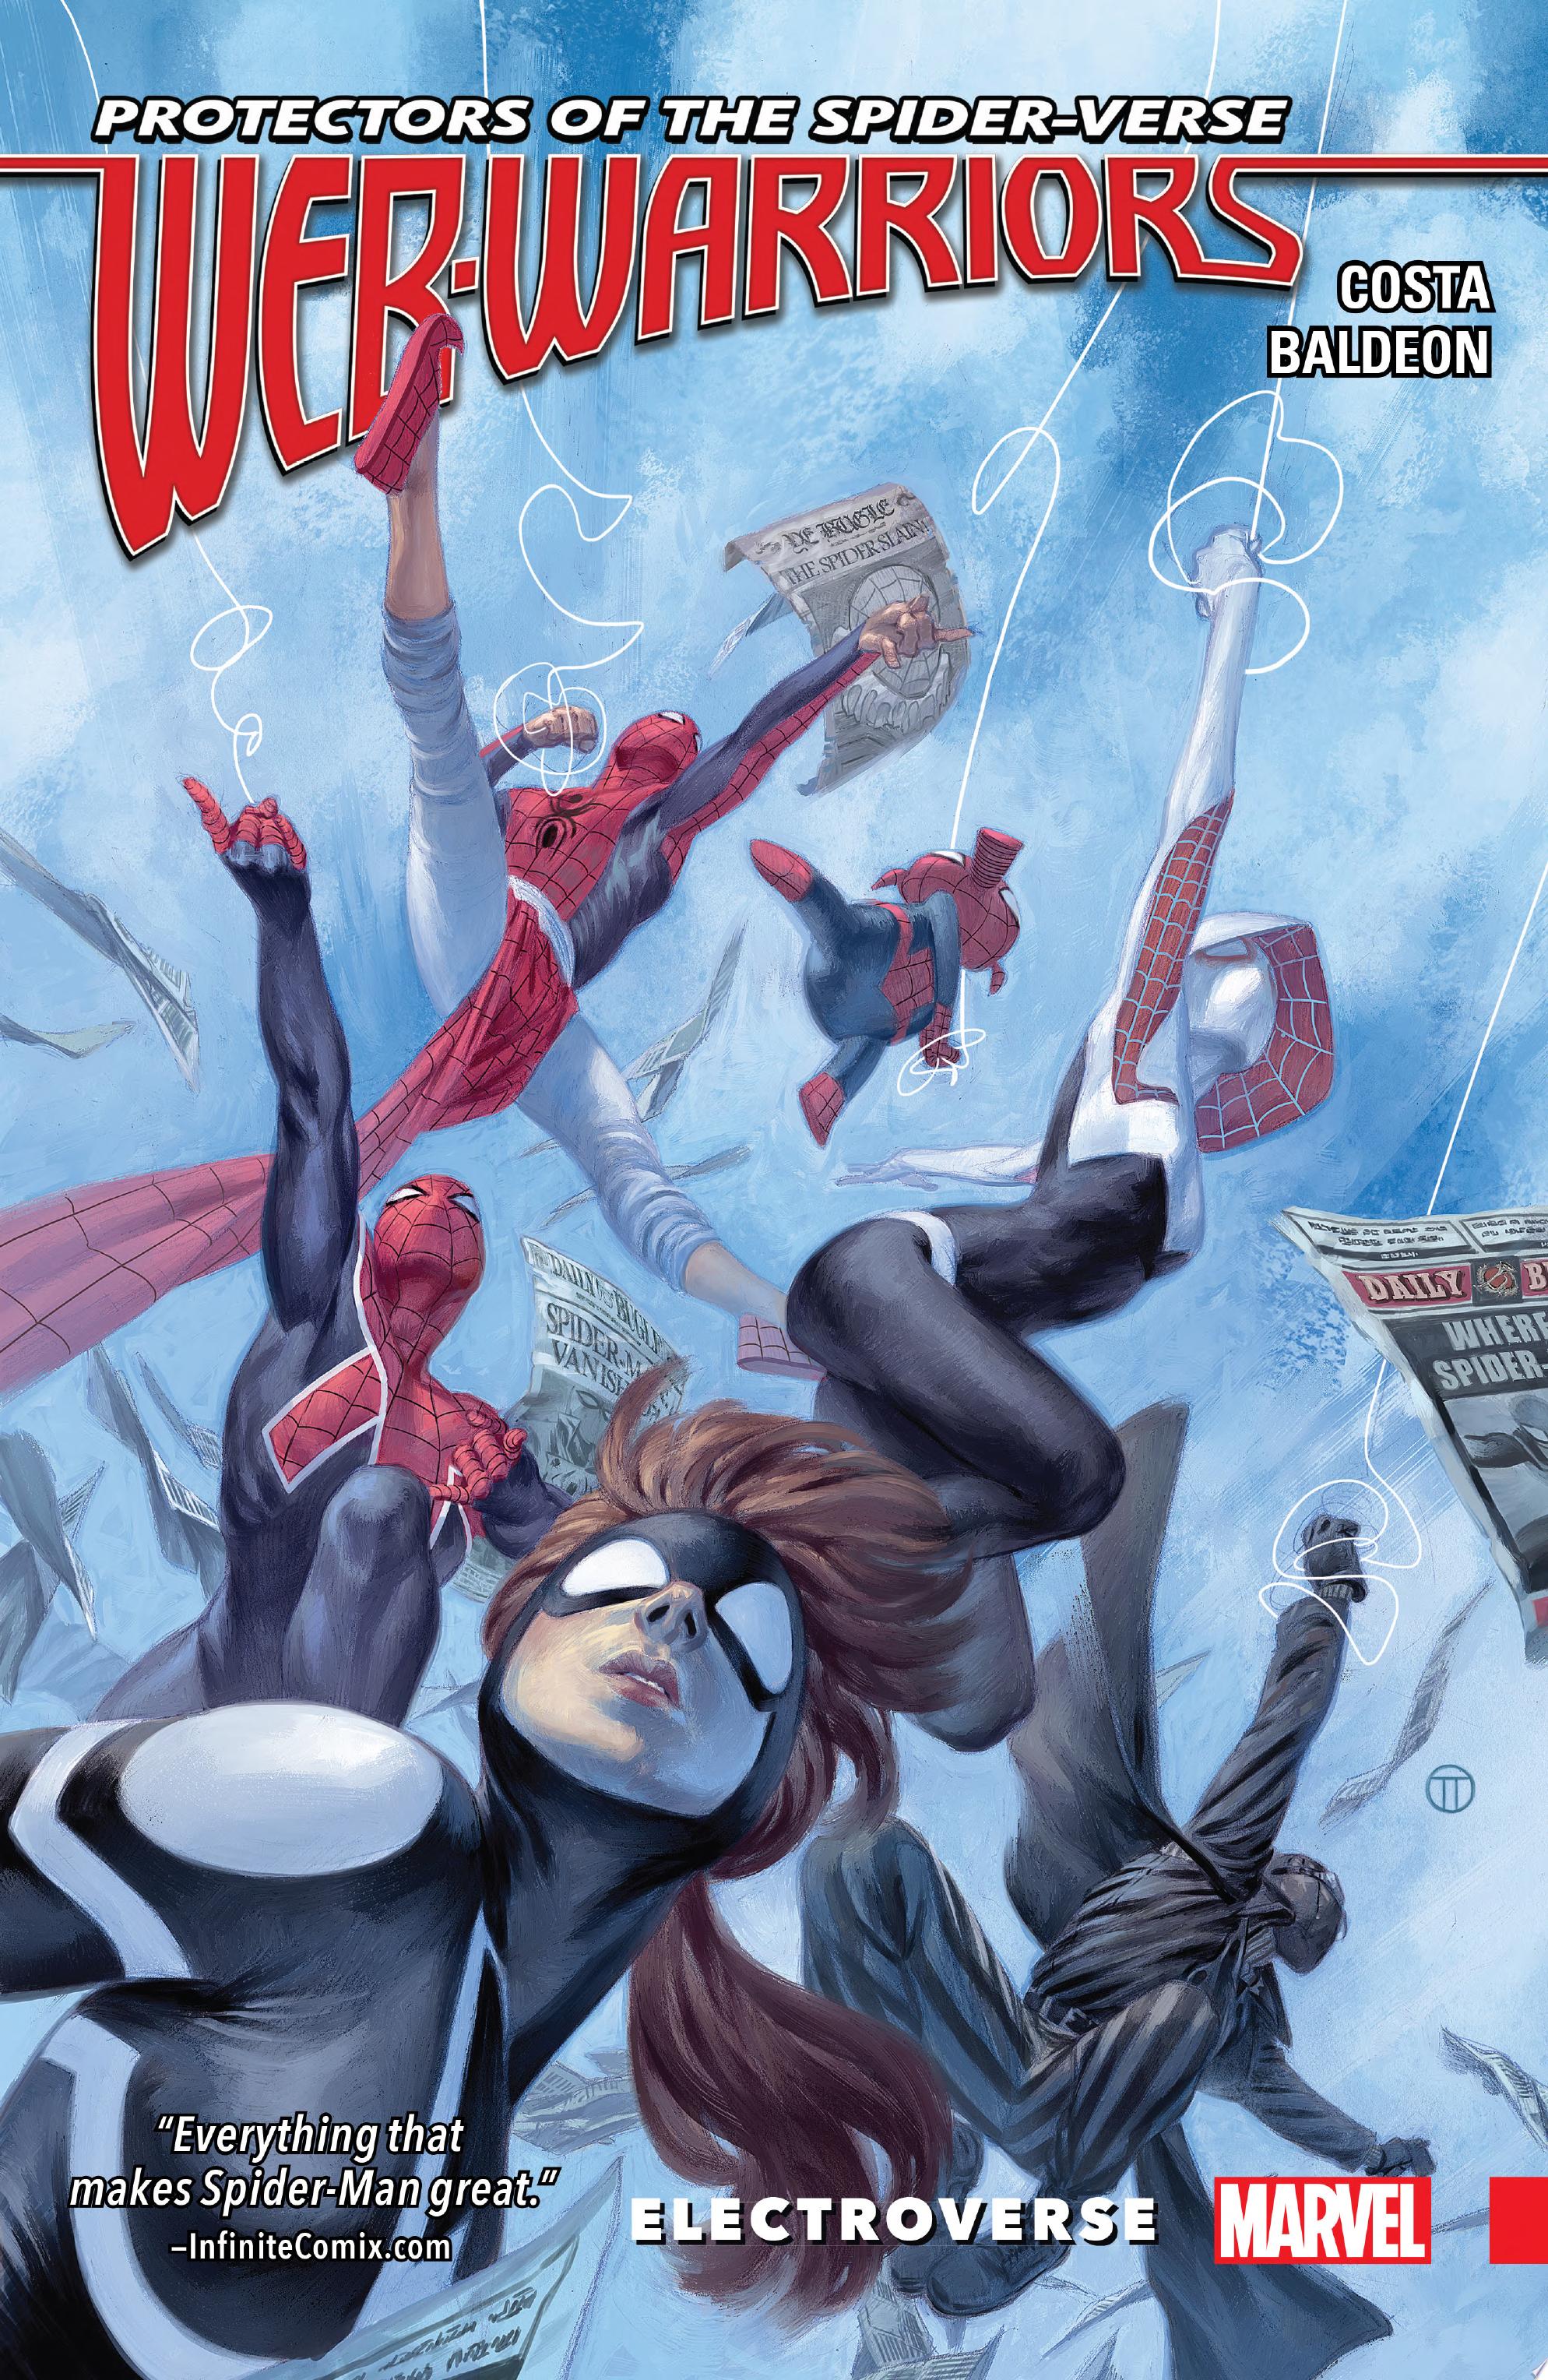 Image for "Web Warriors Of The Spider-Verse Vol. 1 - Electroverse"